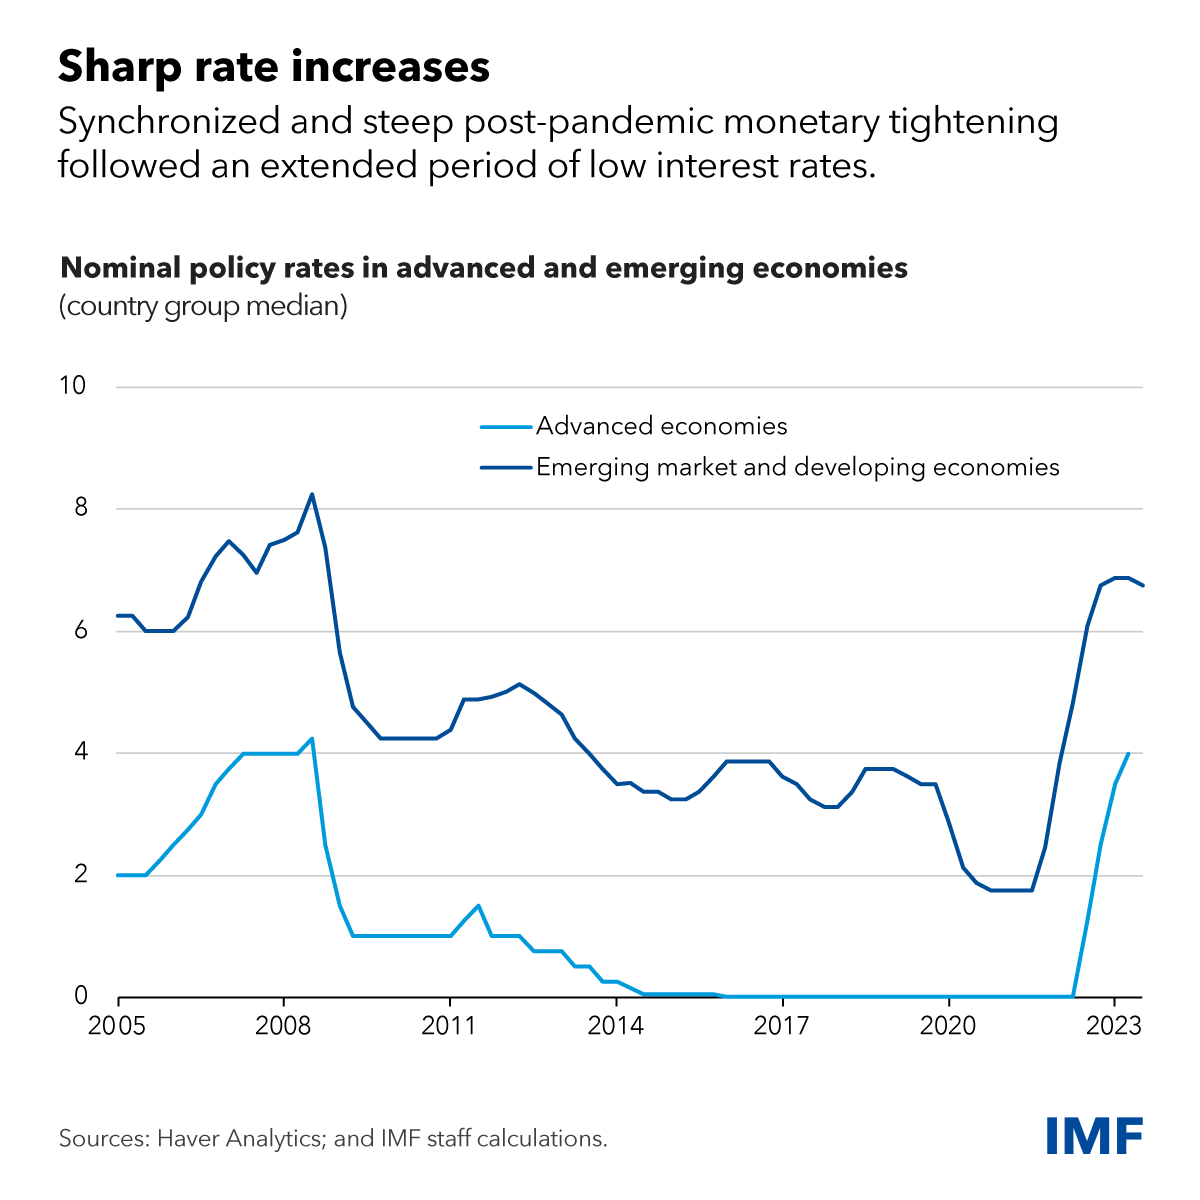 Nominal policy rates in advanced and emerging markets